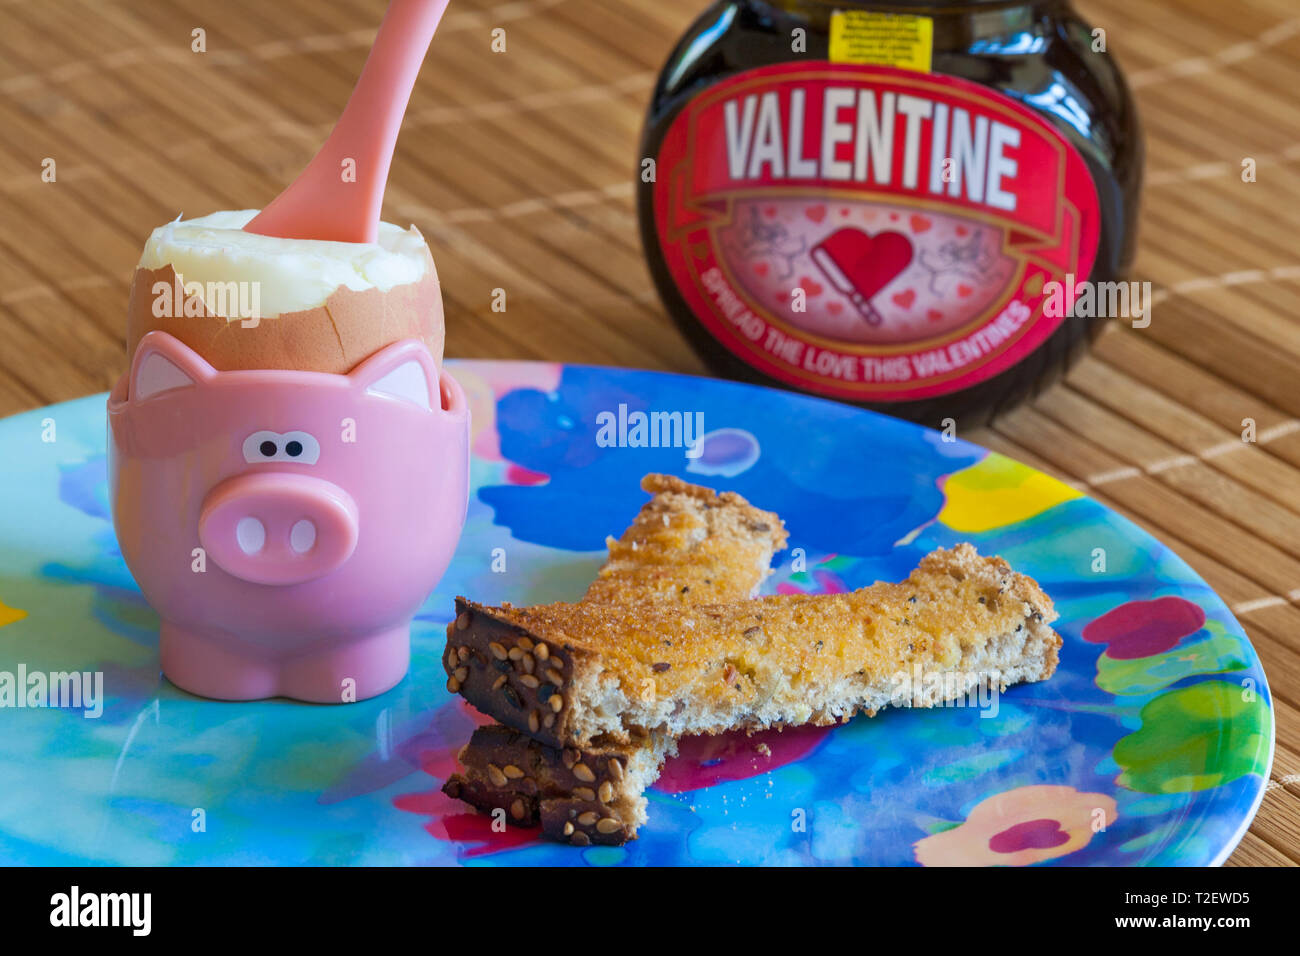 Boiled egg in egg cup with soldiers toast and jar Special edition jar of Valentine Marmite by Unilever - breakfast concept Stock Photo